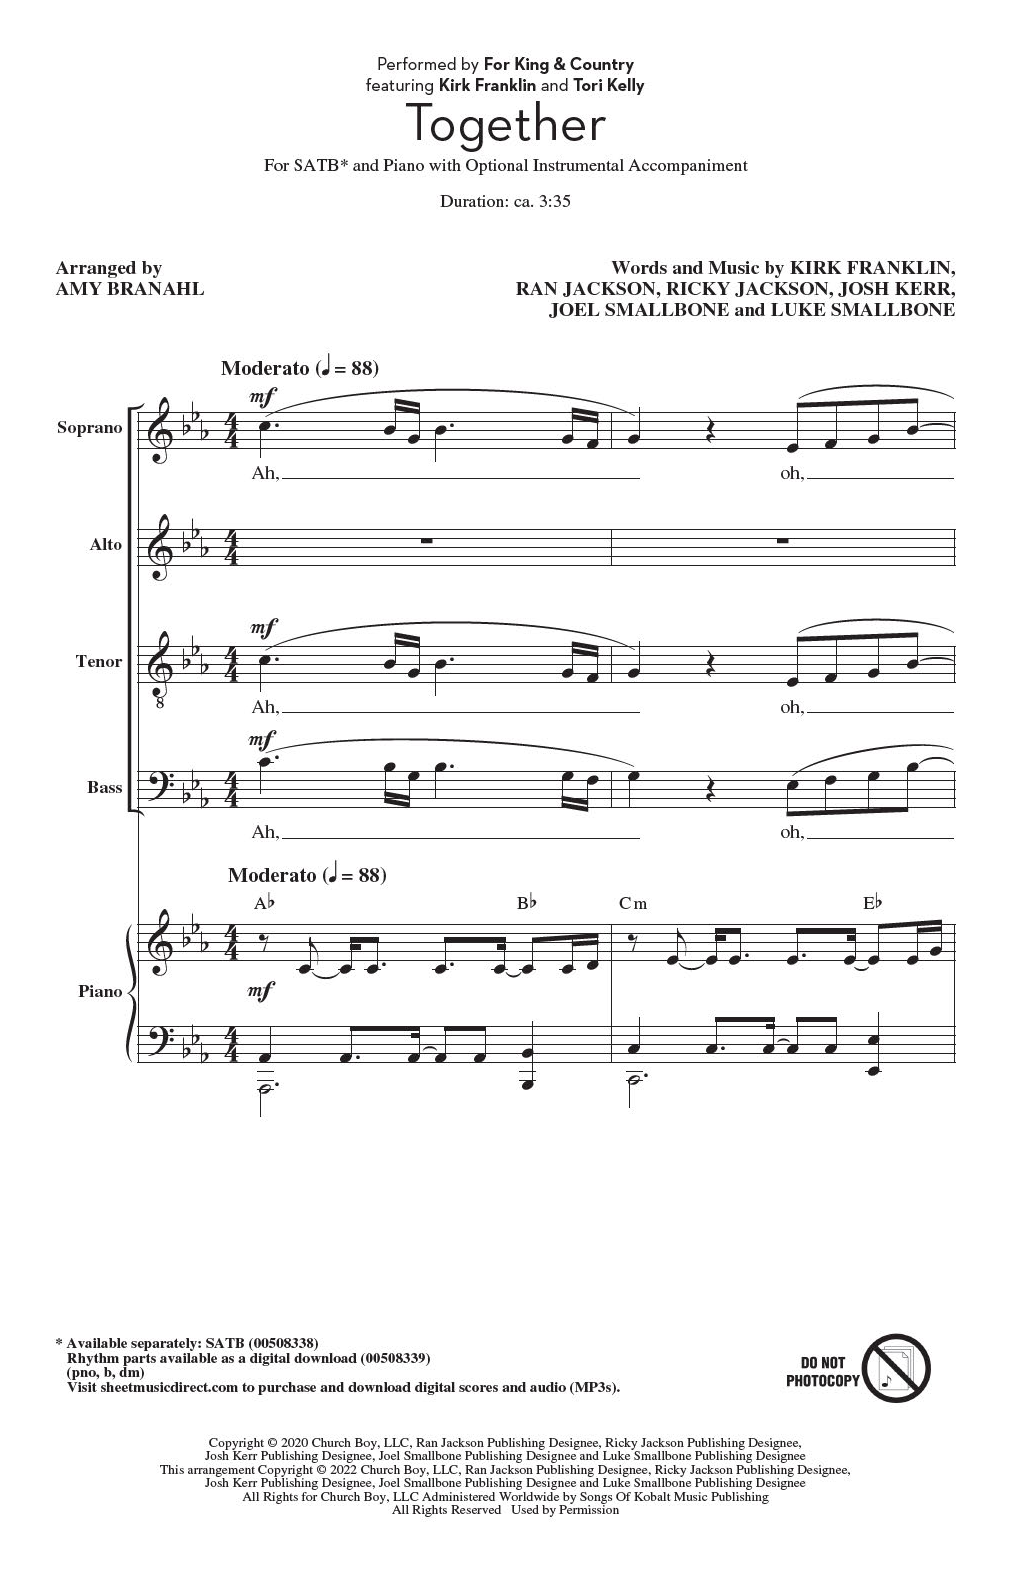 Together (feat. Kirk Franklin and Tori Kelly) (arr. Amy Branahl) (SATB Choir) von for KING & COUNTRY